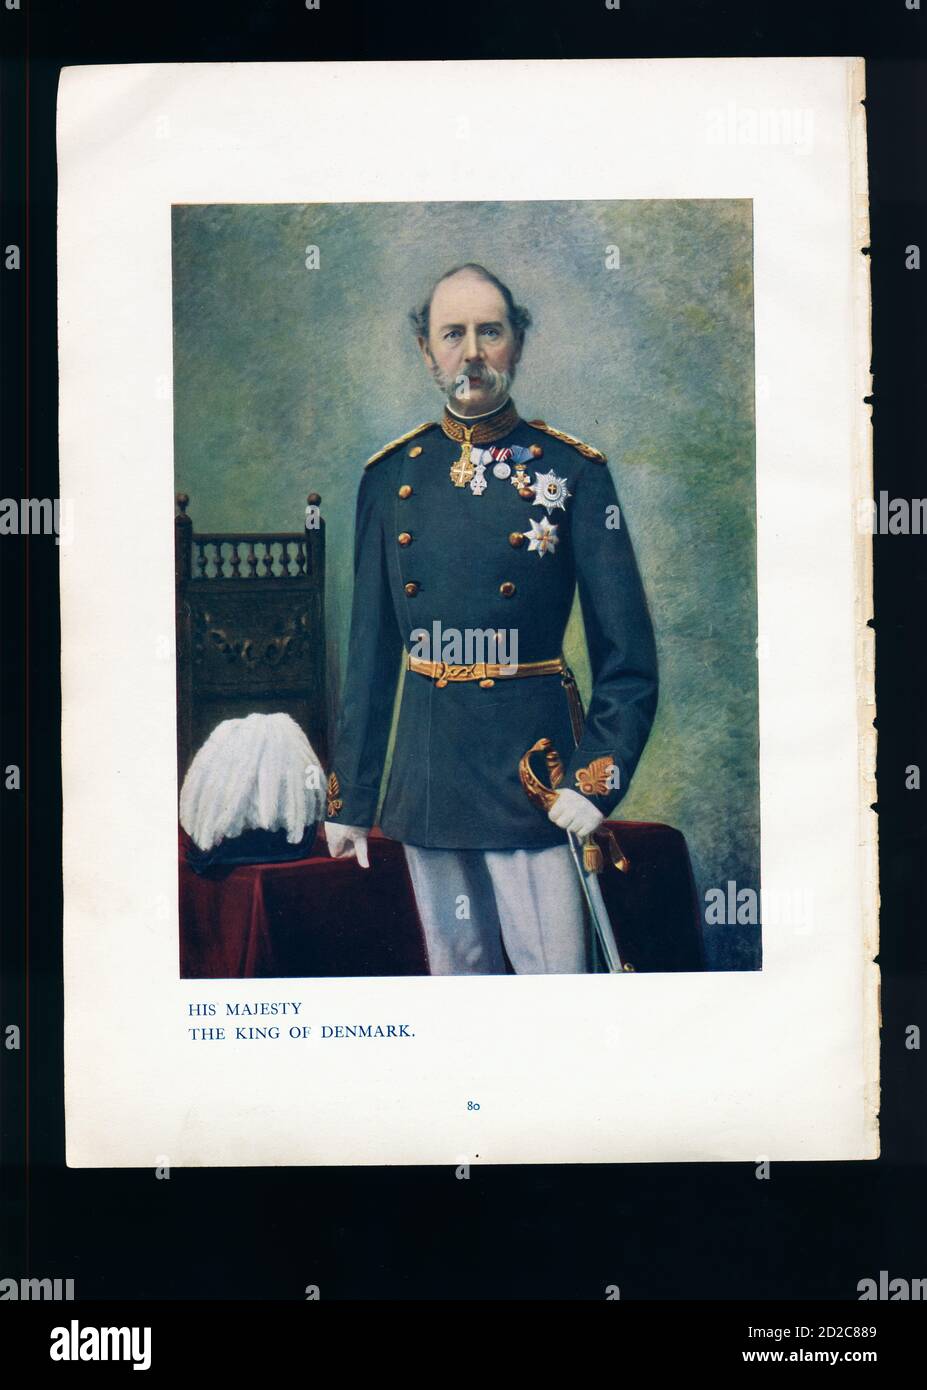 Chromolithographic portrait of King Christian IX of Denmark (8 April 1818 - 29 January 1906). He reigned the Kingdom from 15 November 1863 to 29 Janua Stock Photo